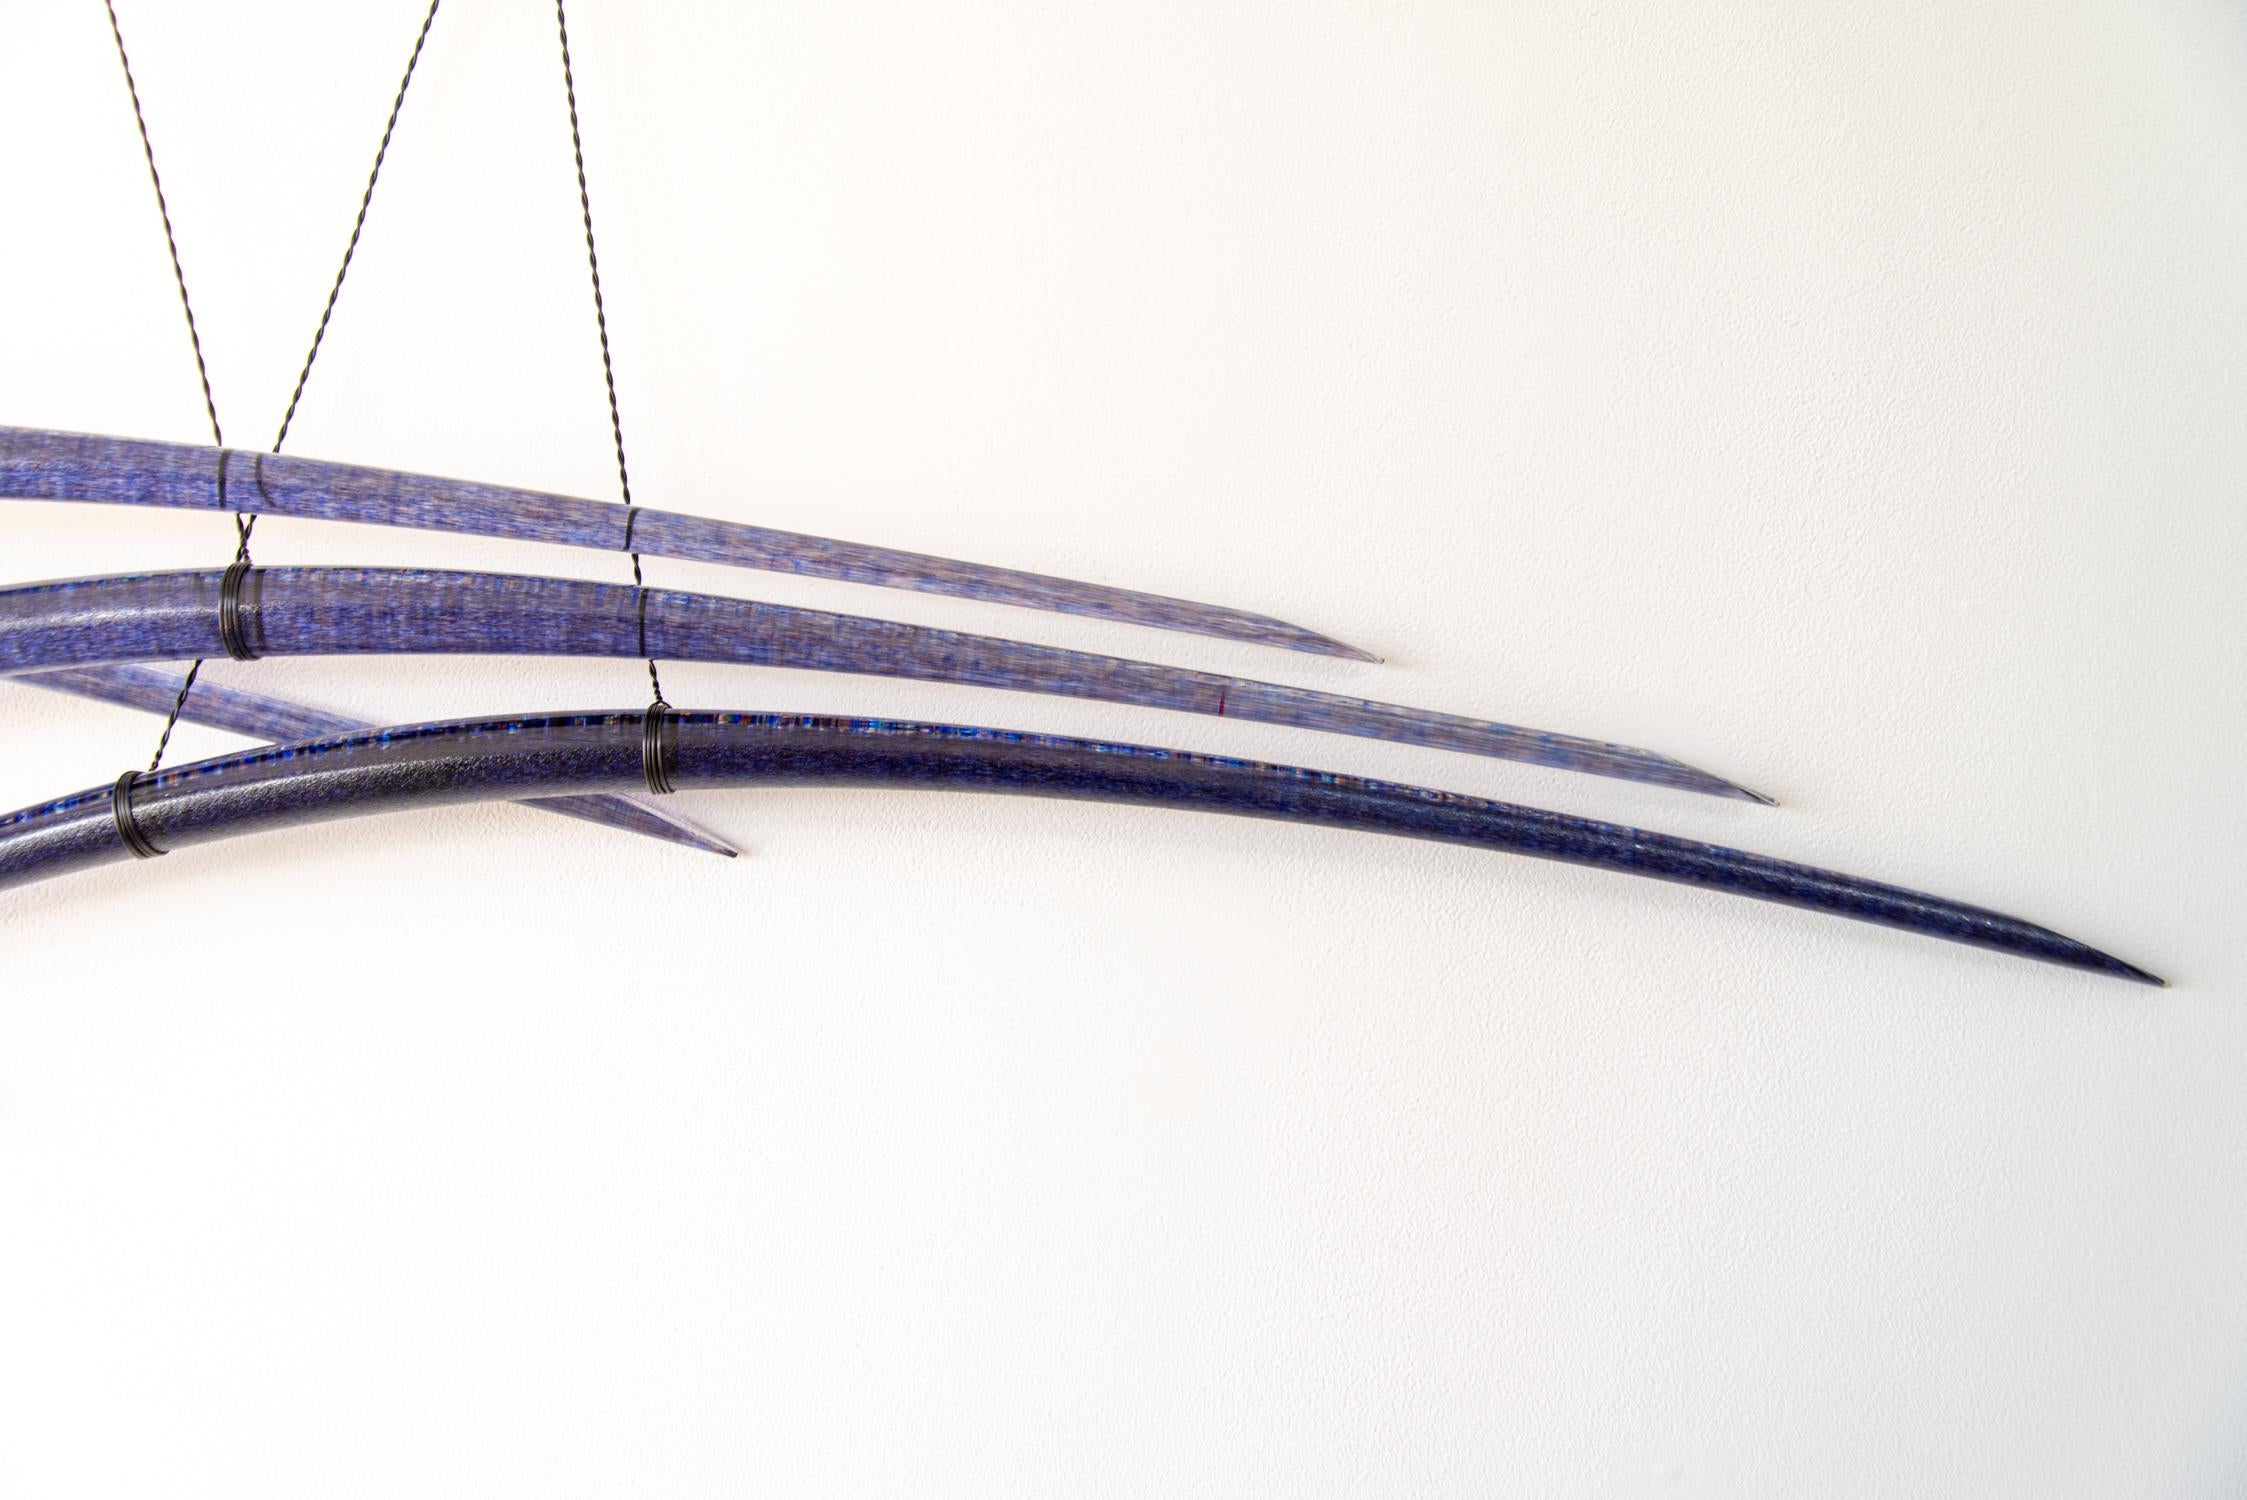 Canadian artist John Paul Robinson has chosen a deep blue for this elegant glass wall sculpture. Six arched pieces of translucent glass are suspended by fine steel cables…each crisscrossing the other in a graceful composition.
His glass work is